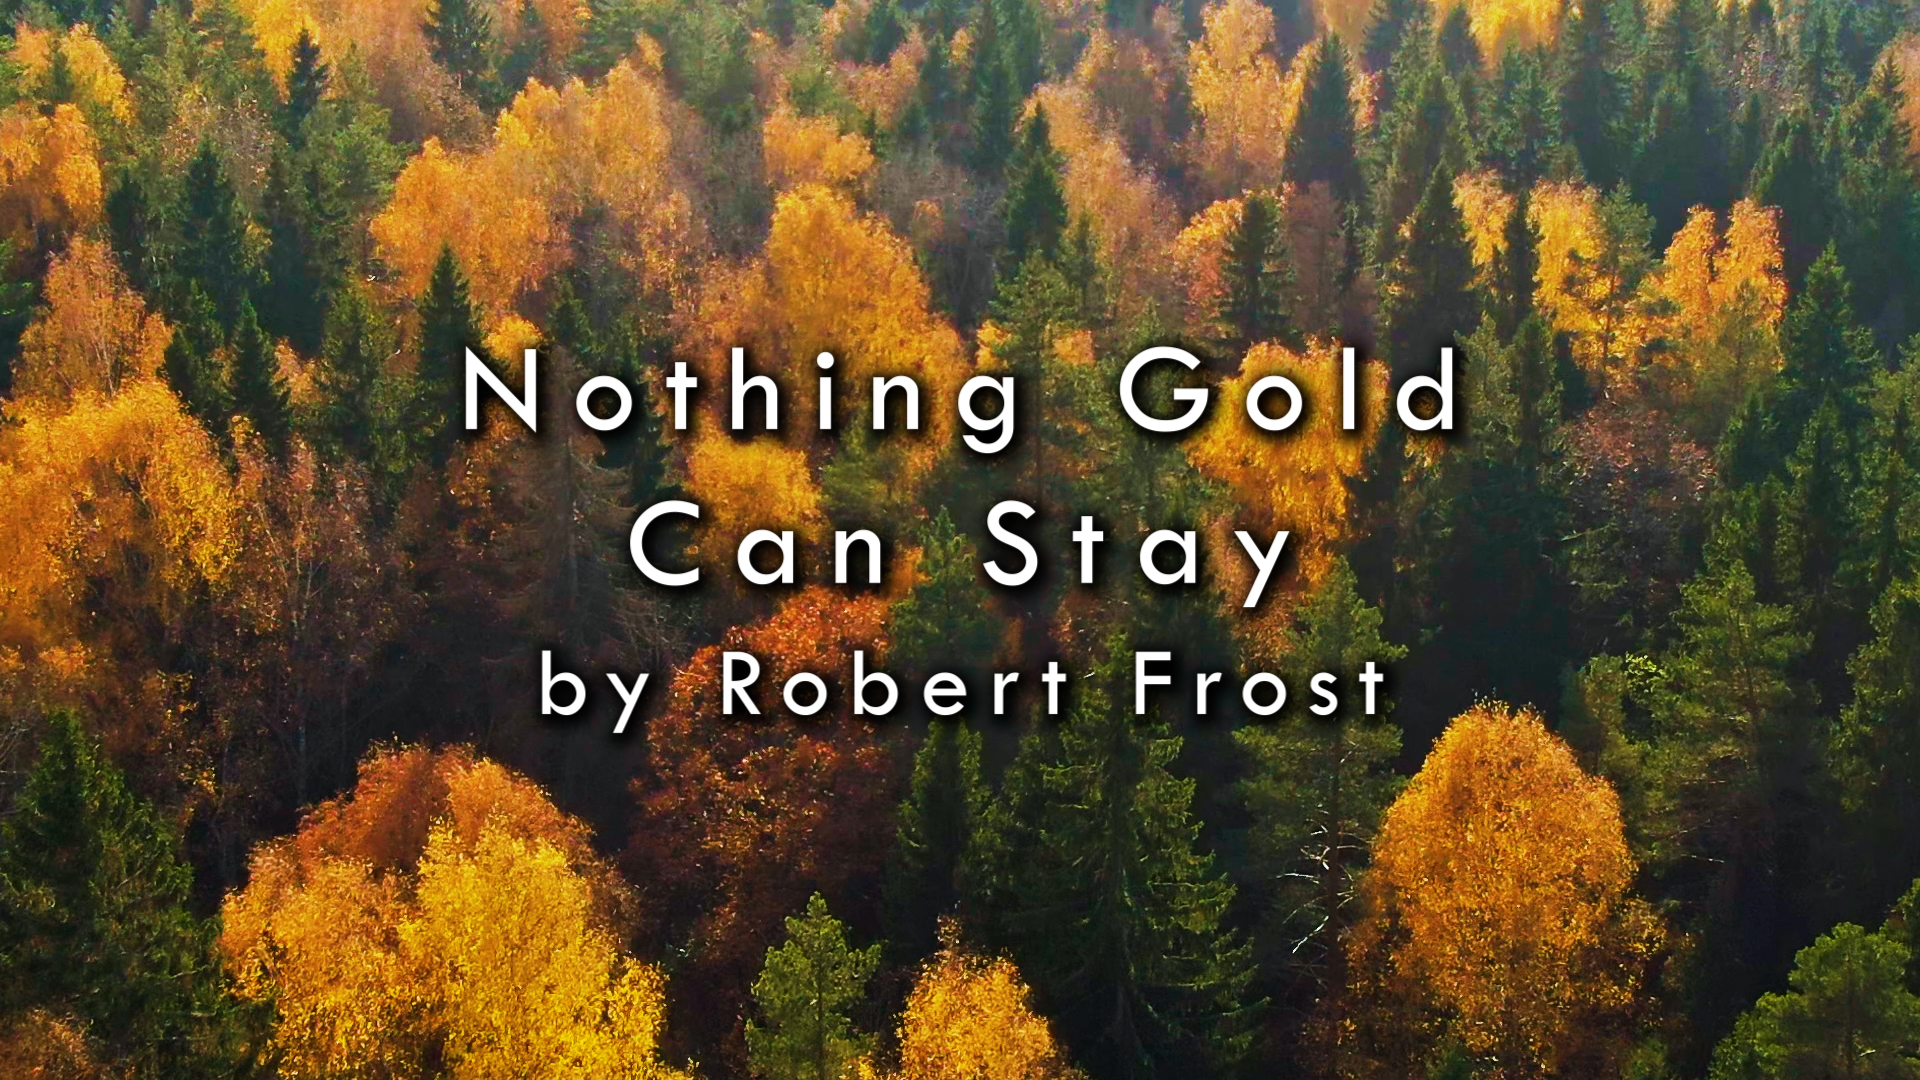 Nothing Gold Can Stay by Robert Frost, ready by Zack Lawrence